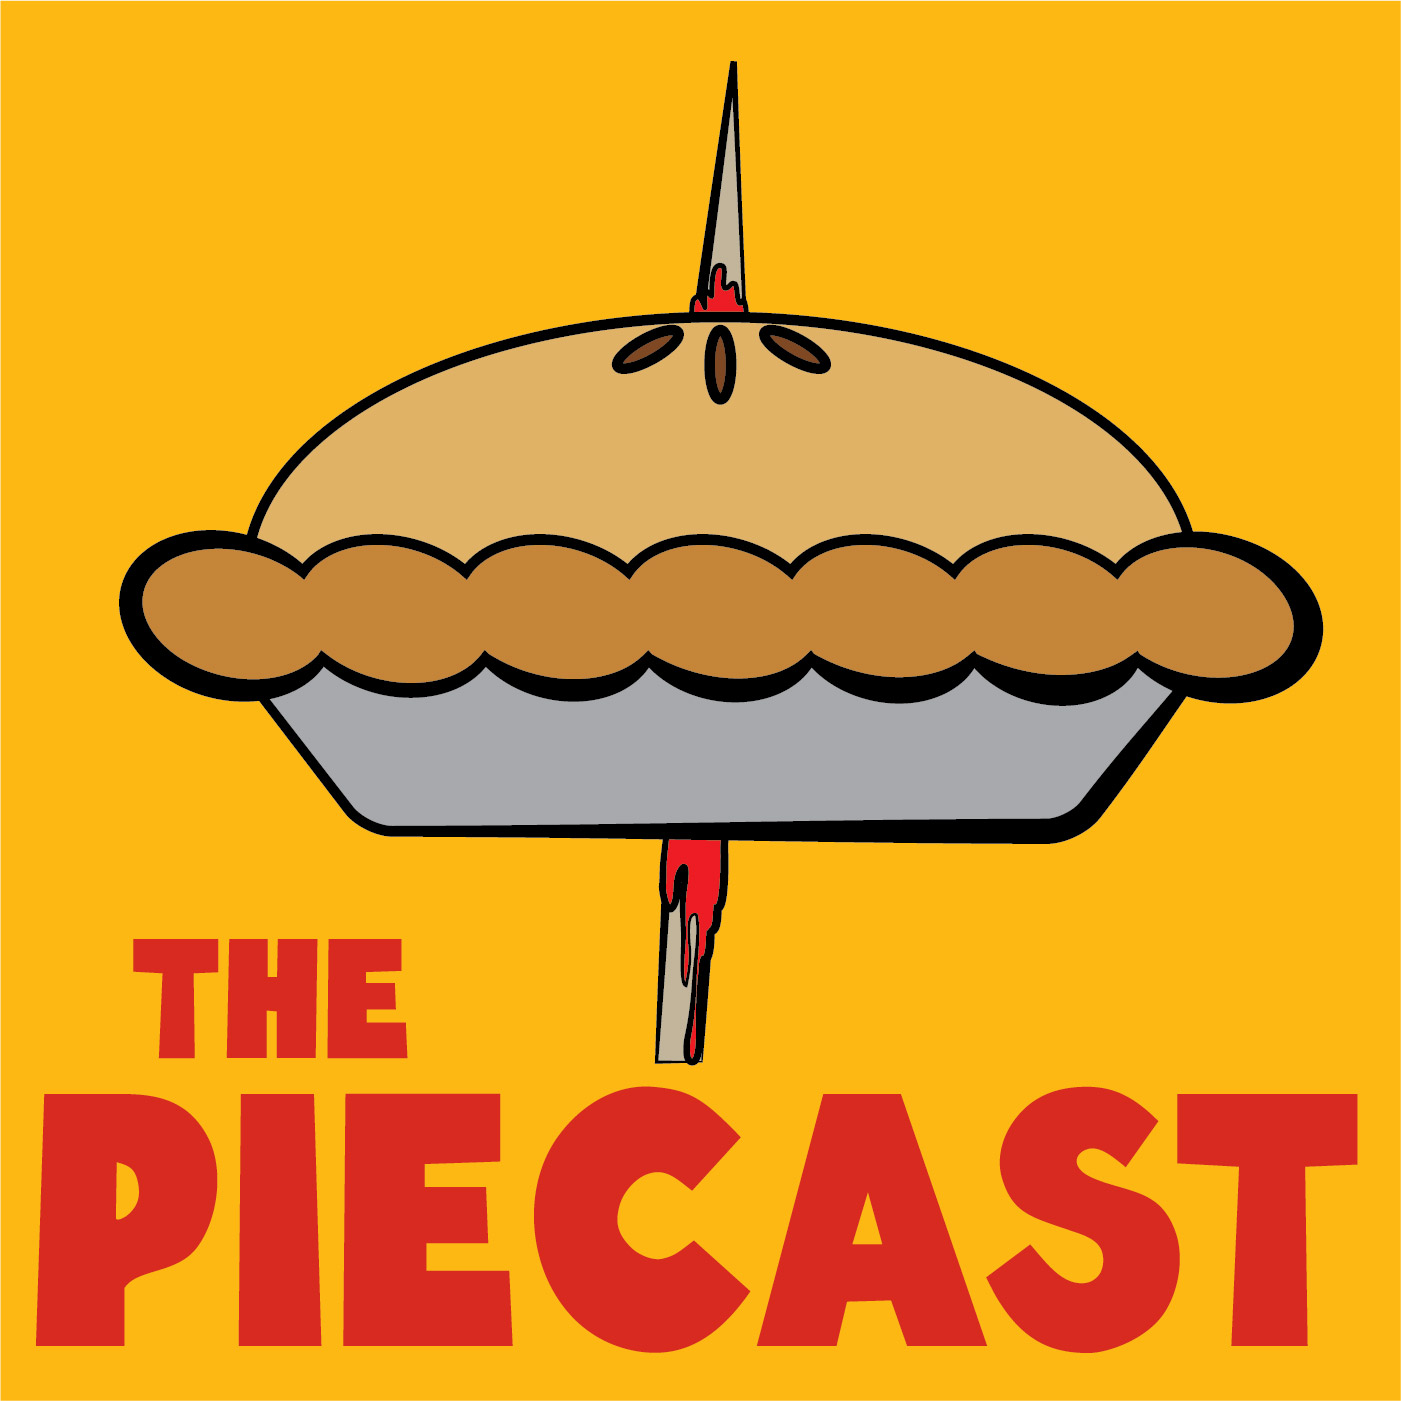 Fire and Lunch PieCast: Episode 61 - Season 7 Preview and Discussion